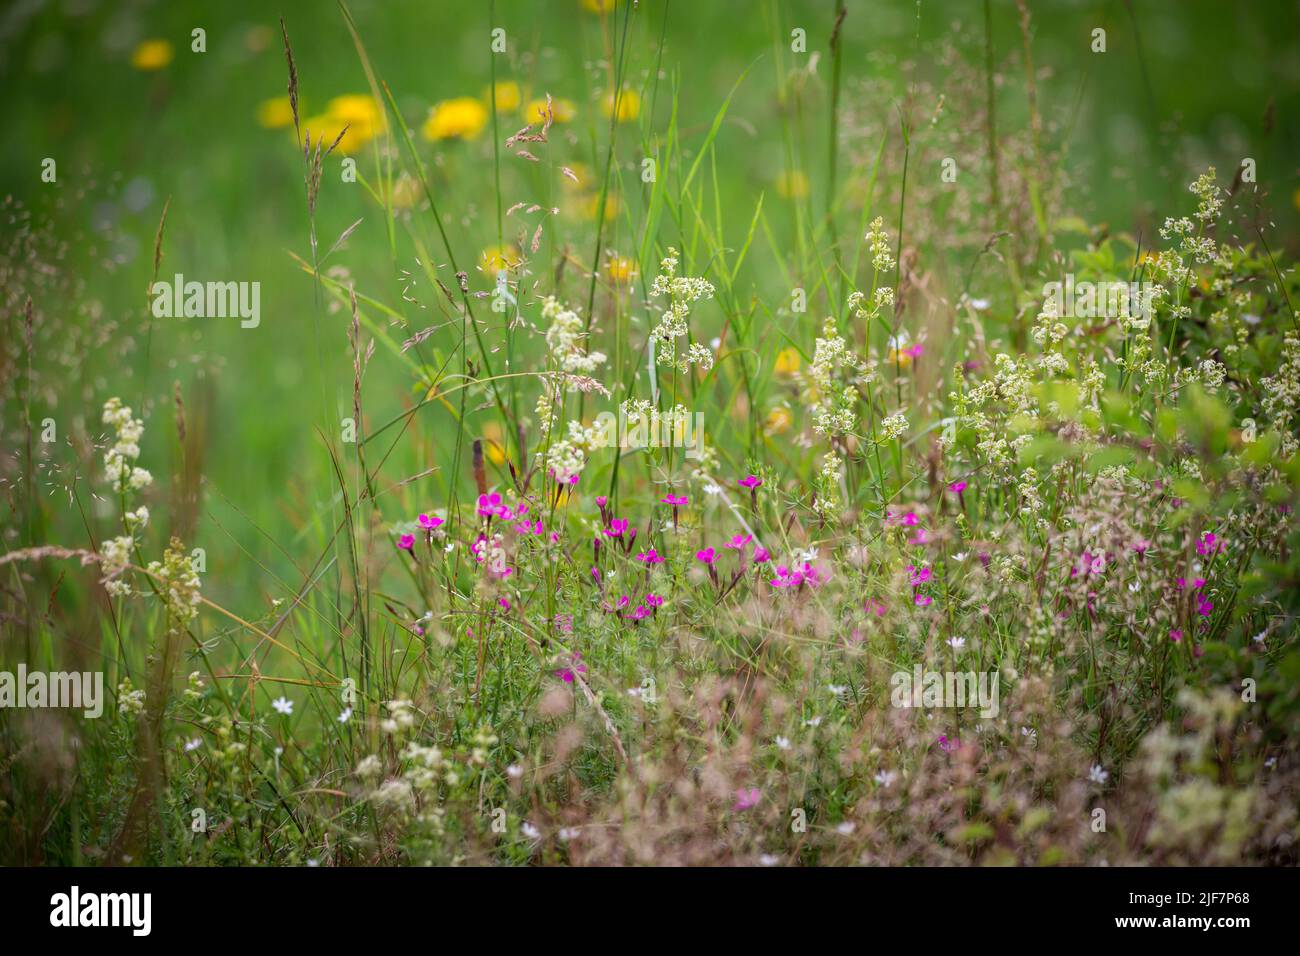 Wild flowers in a nature garden Stock Photo